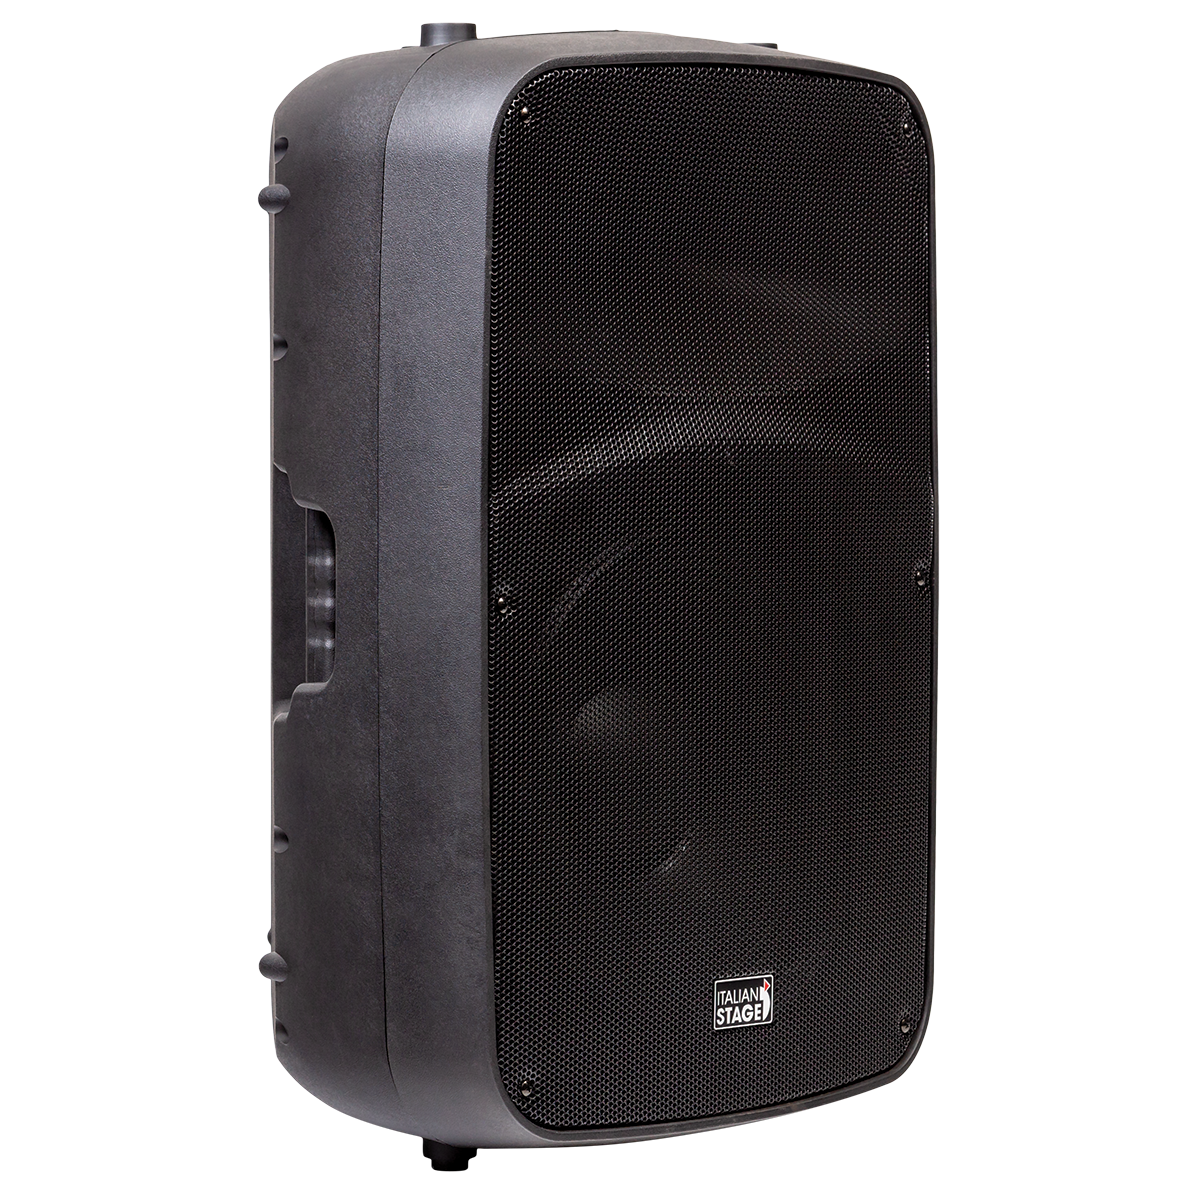 Italian Stage 15" Speaker with Media Player